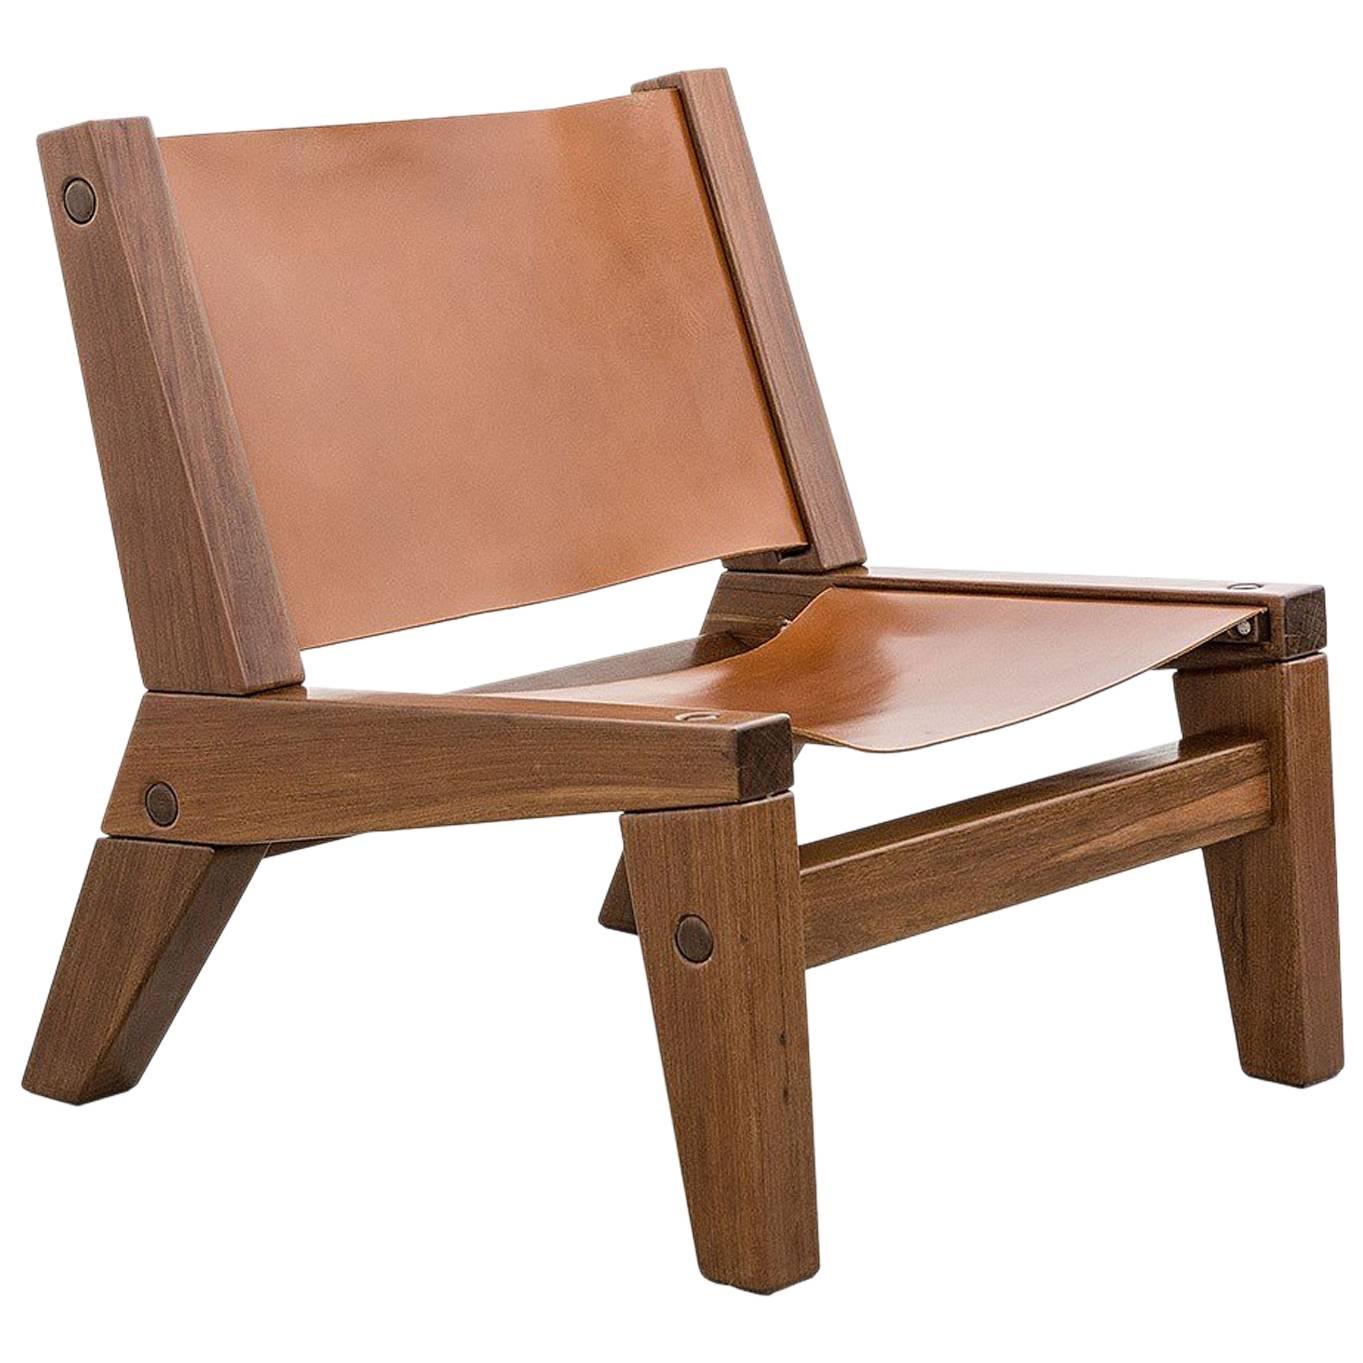 The PC line of Brazilian contemporary pieces, which this casual lounge chair is part of, was created exclusively by Zanini de Zanine for Herança cultural. The piece is constructed with Brazilian Ipê solid wood extracted from demolition.